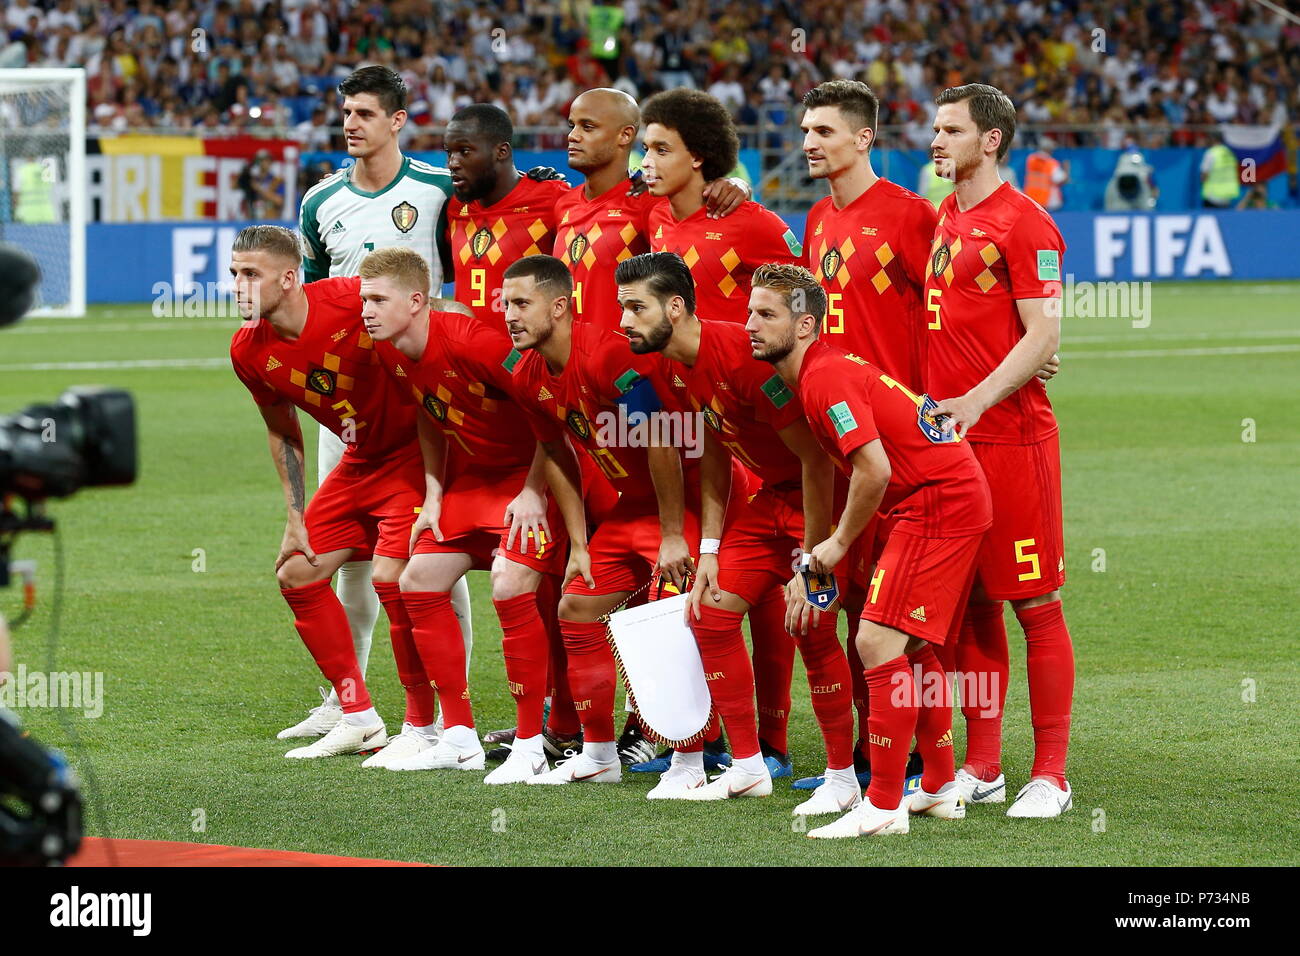 Rostov On Don, Russia. 2nd July, 2018. Belgium team group line-up (BEL) Football/Soccer : FIFA World Cup Russia 2018 match between Belgium 3-2 Japan at the Rostov Arena in Rostov On Don, Russia . Credit: Mutsu KAWAMORI/AFLO/Alamy Live News Stock Photo